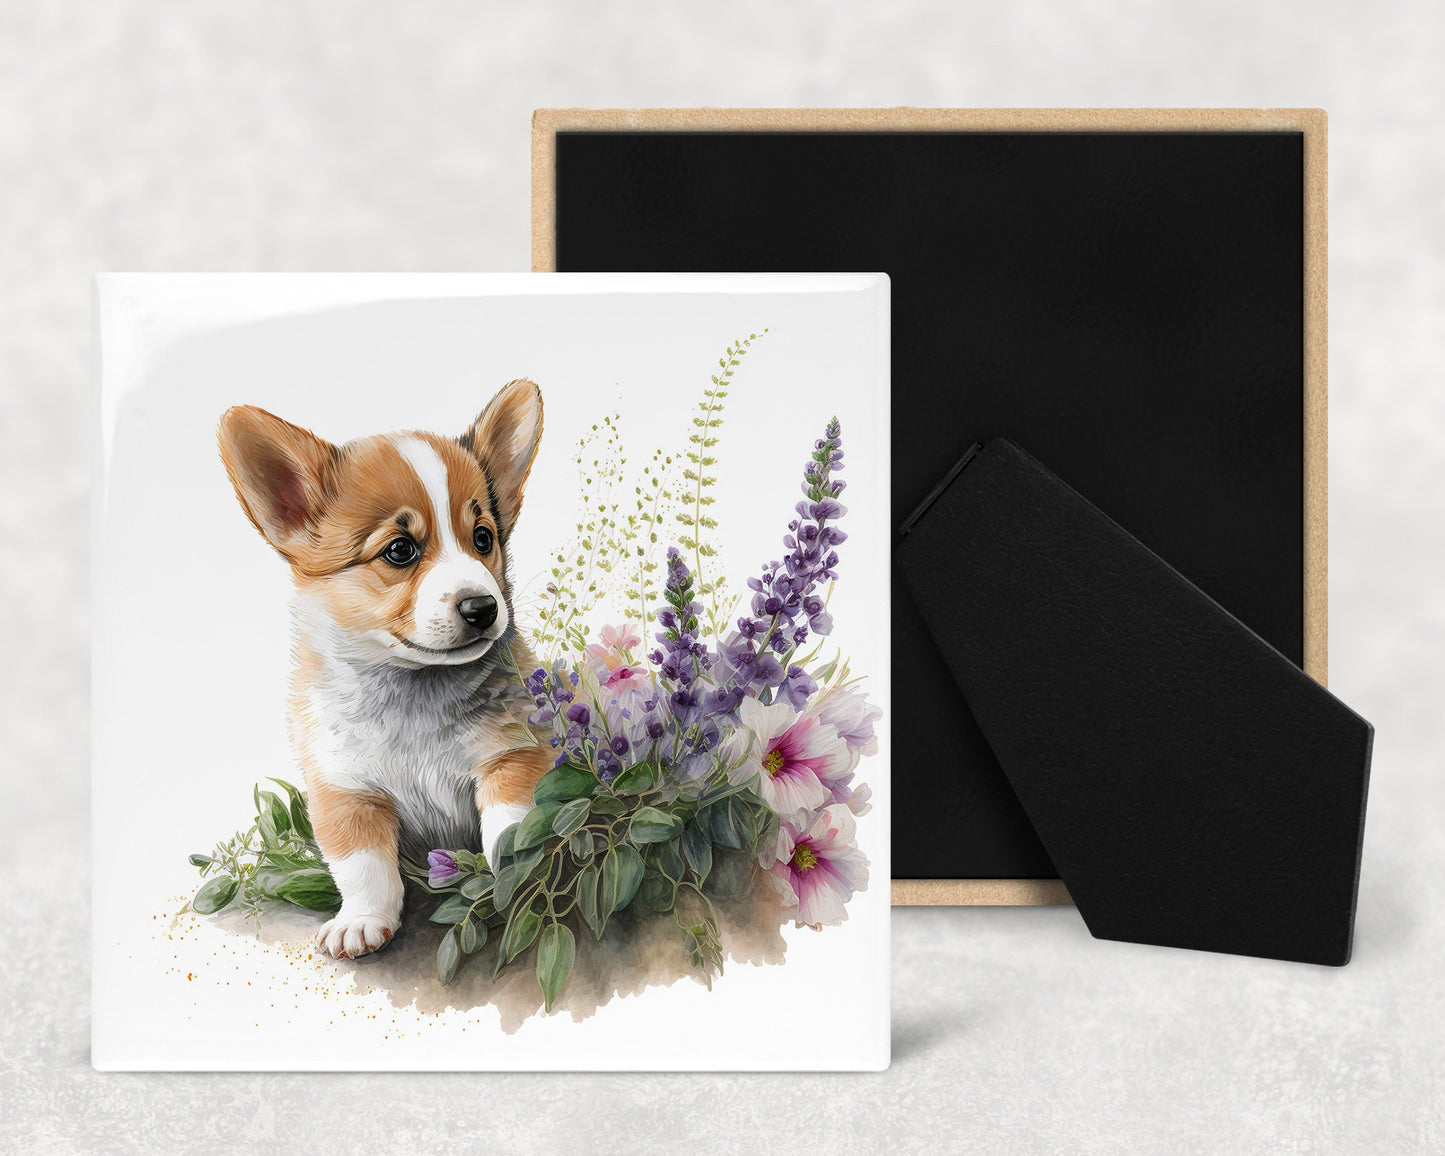 Cute Corgi Puppy Art Decorative Ceramic Tile Set with Optional Easel Back - Available in 4 sizes - Set of 4